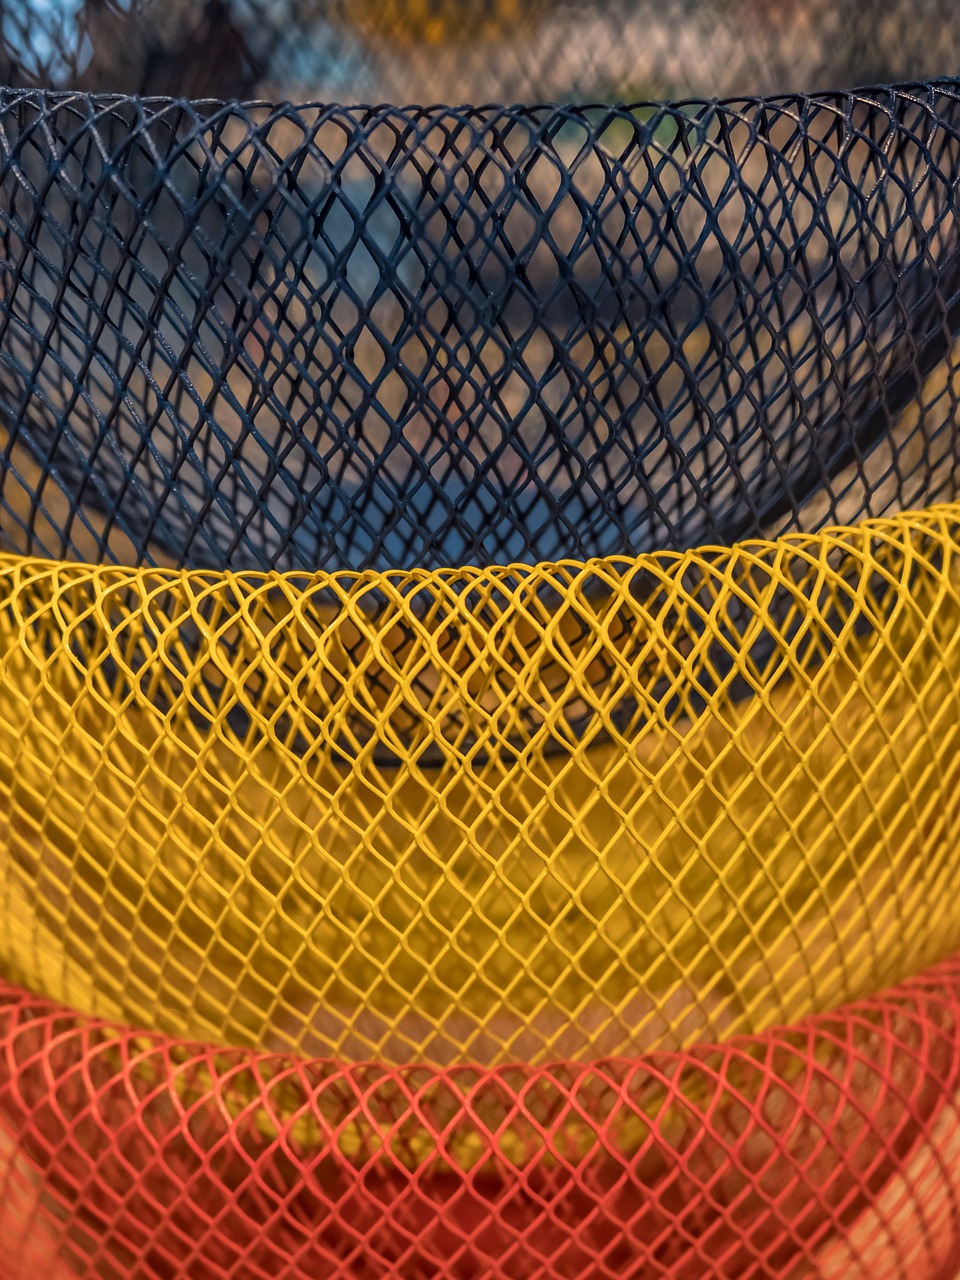 baskets  colors  wires free photo